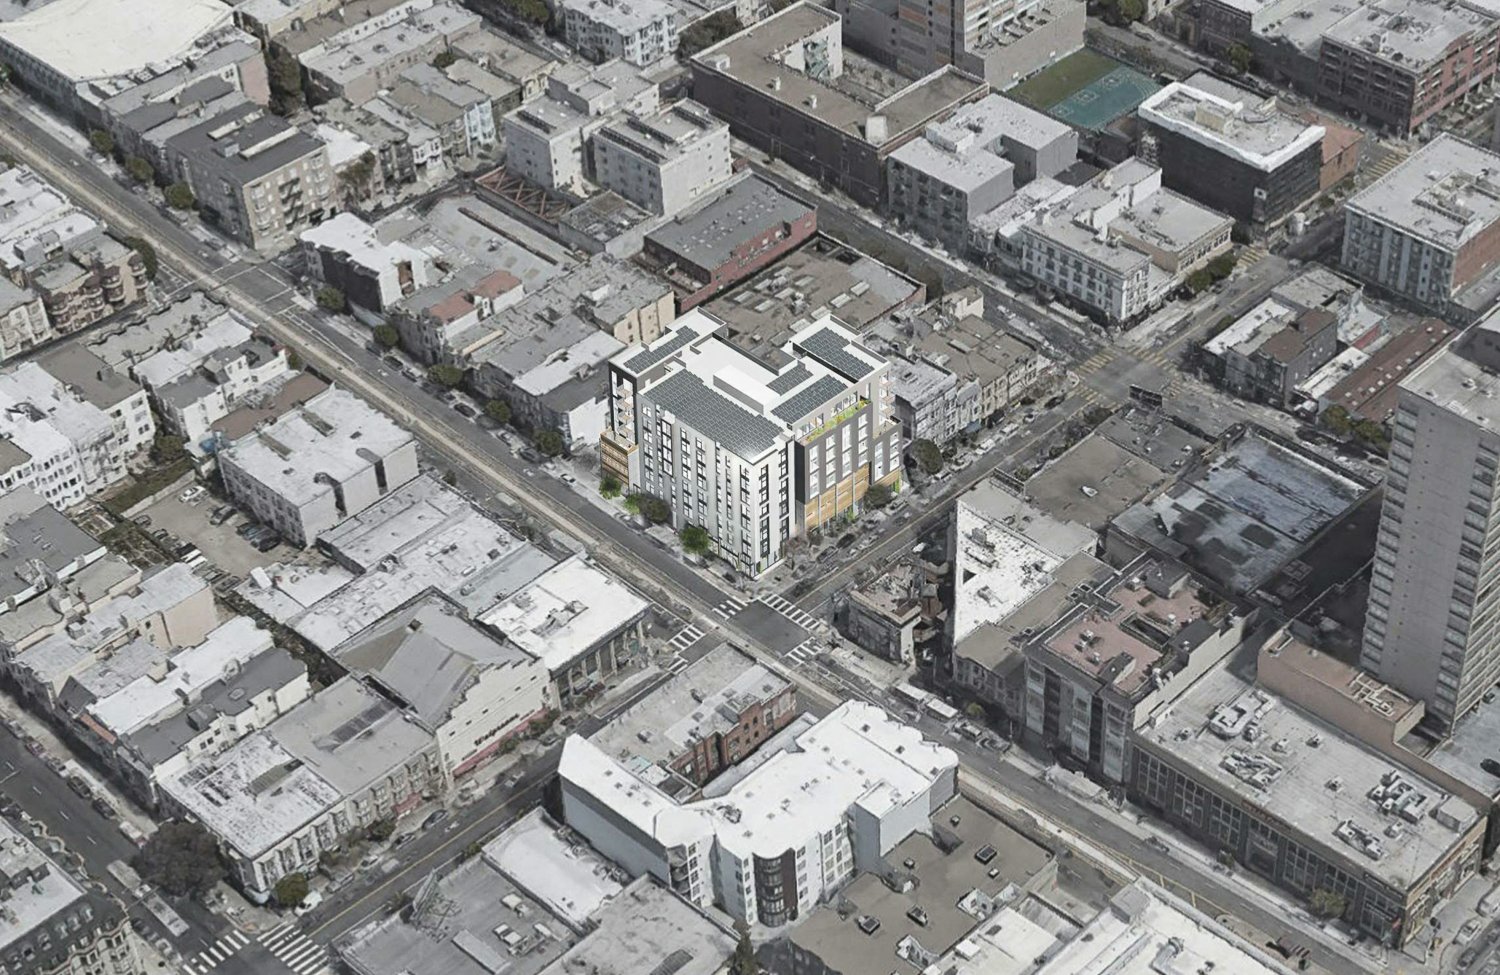 1567 California Street aerial perspective, rendering by David Baker Architects